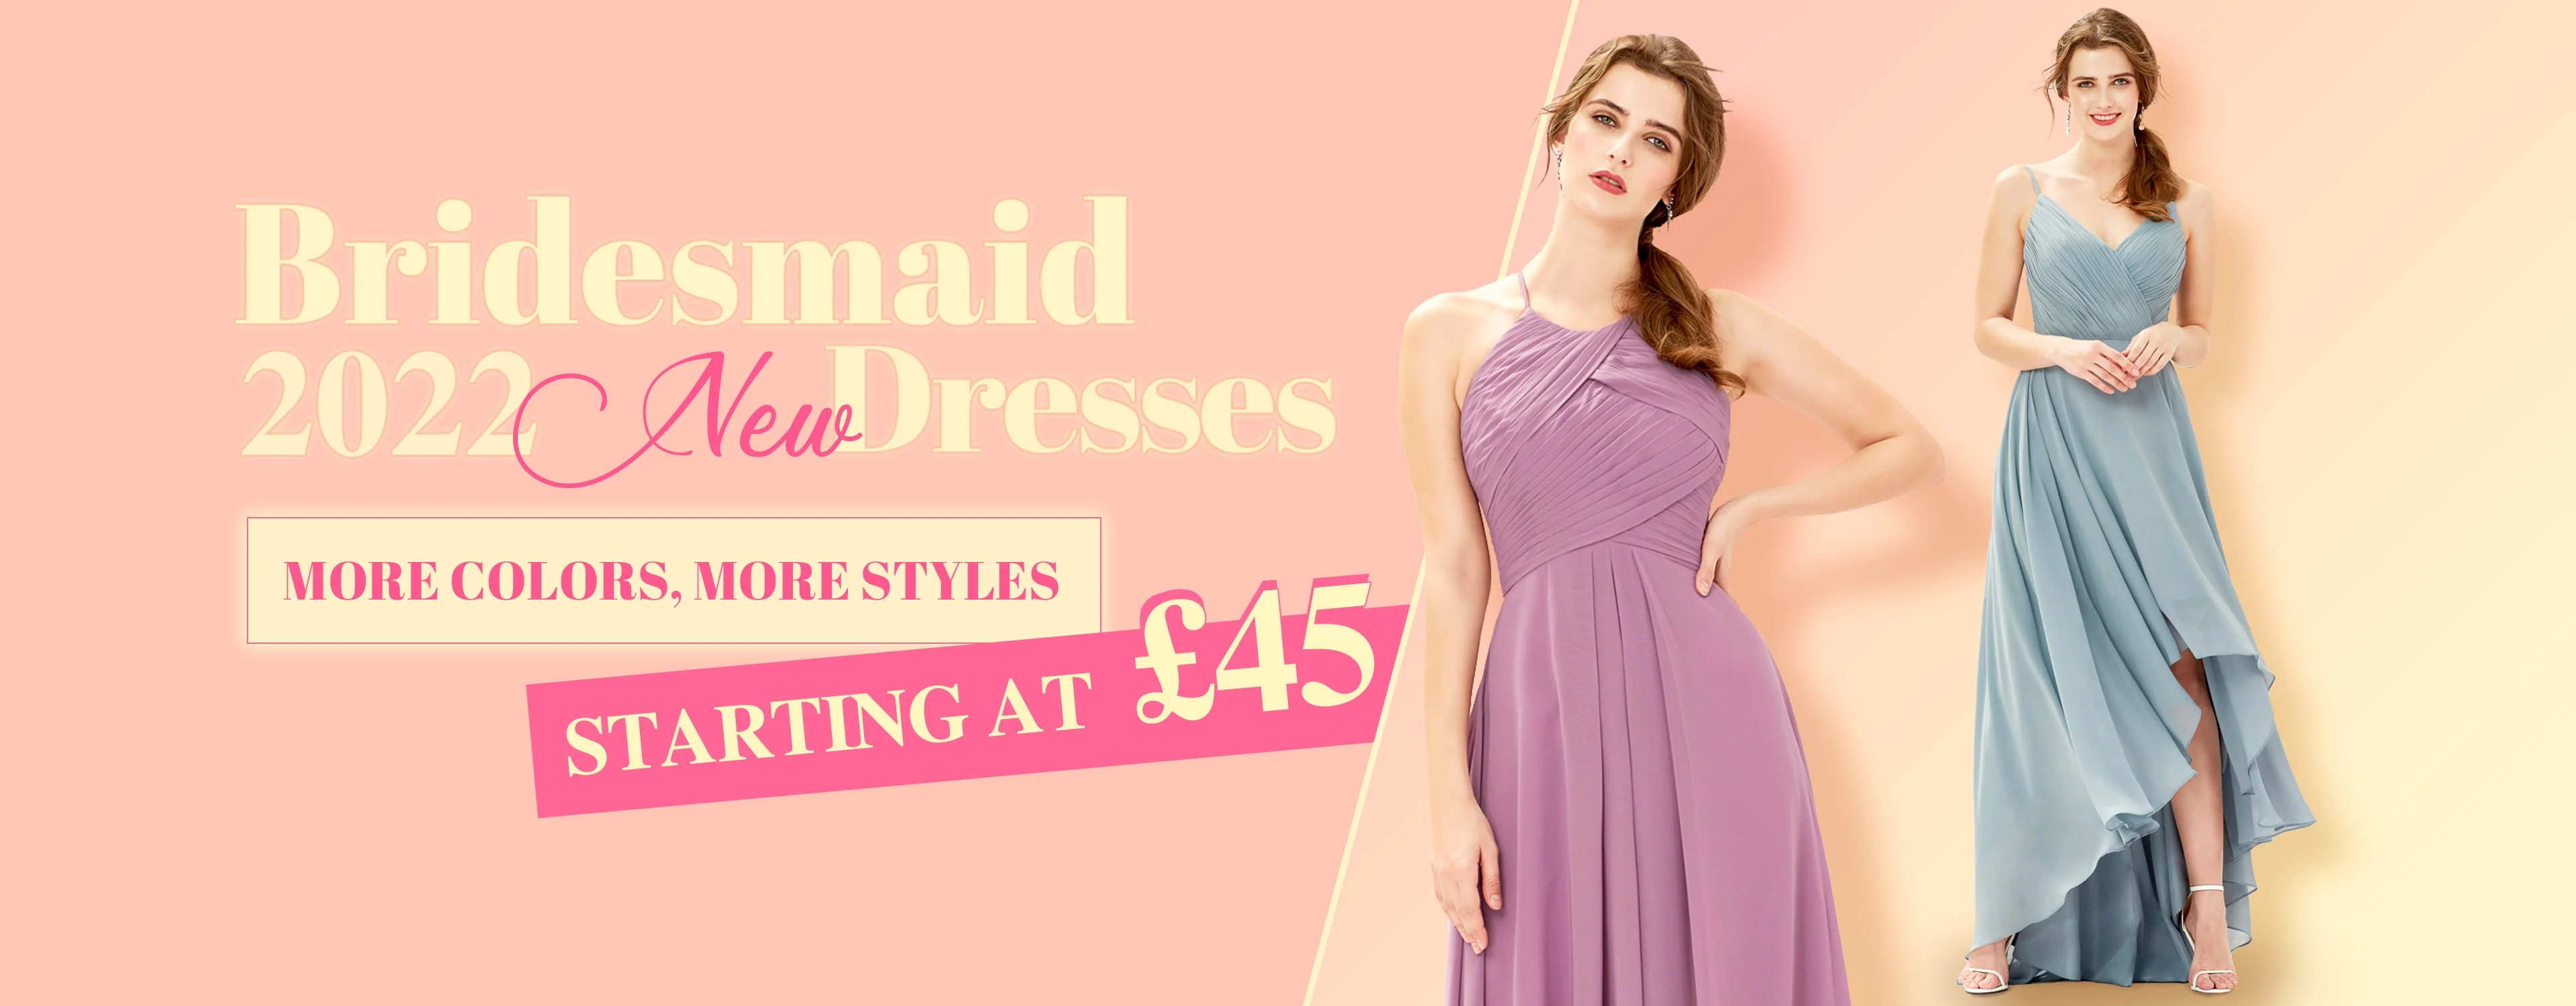 Top 5 Best Bridesmaid Dresses for 2022